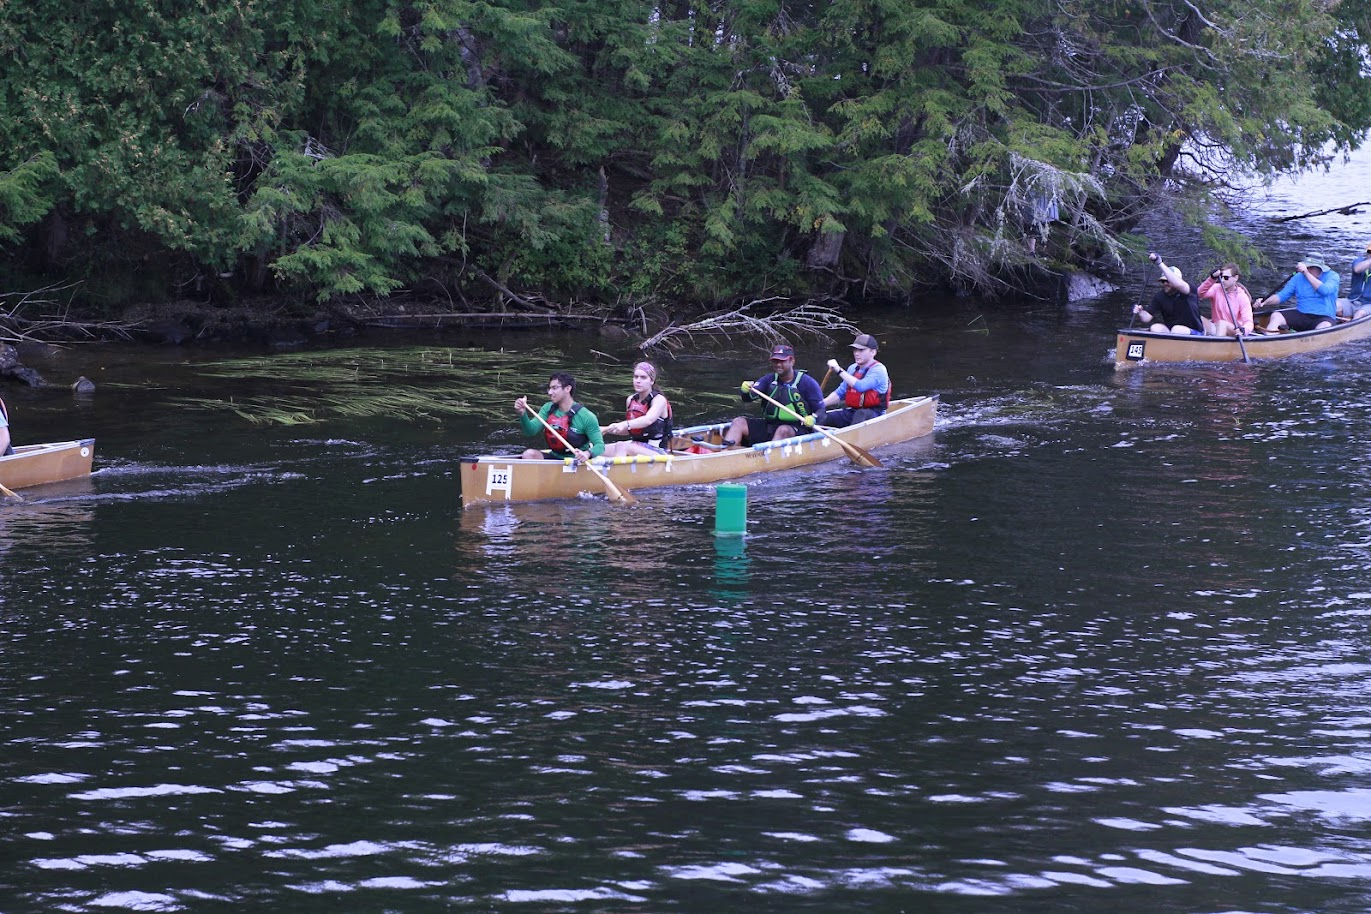 Students paddle two canoes down a waterway, greenery in the background.